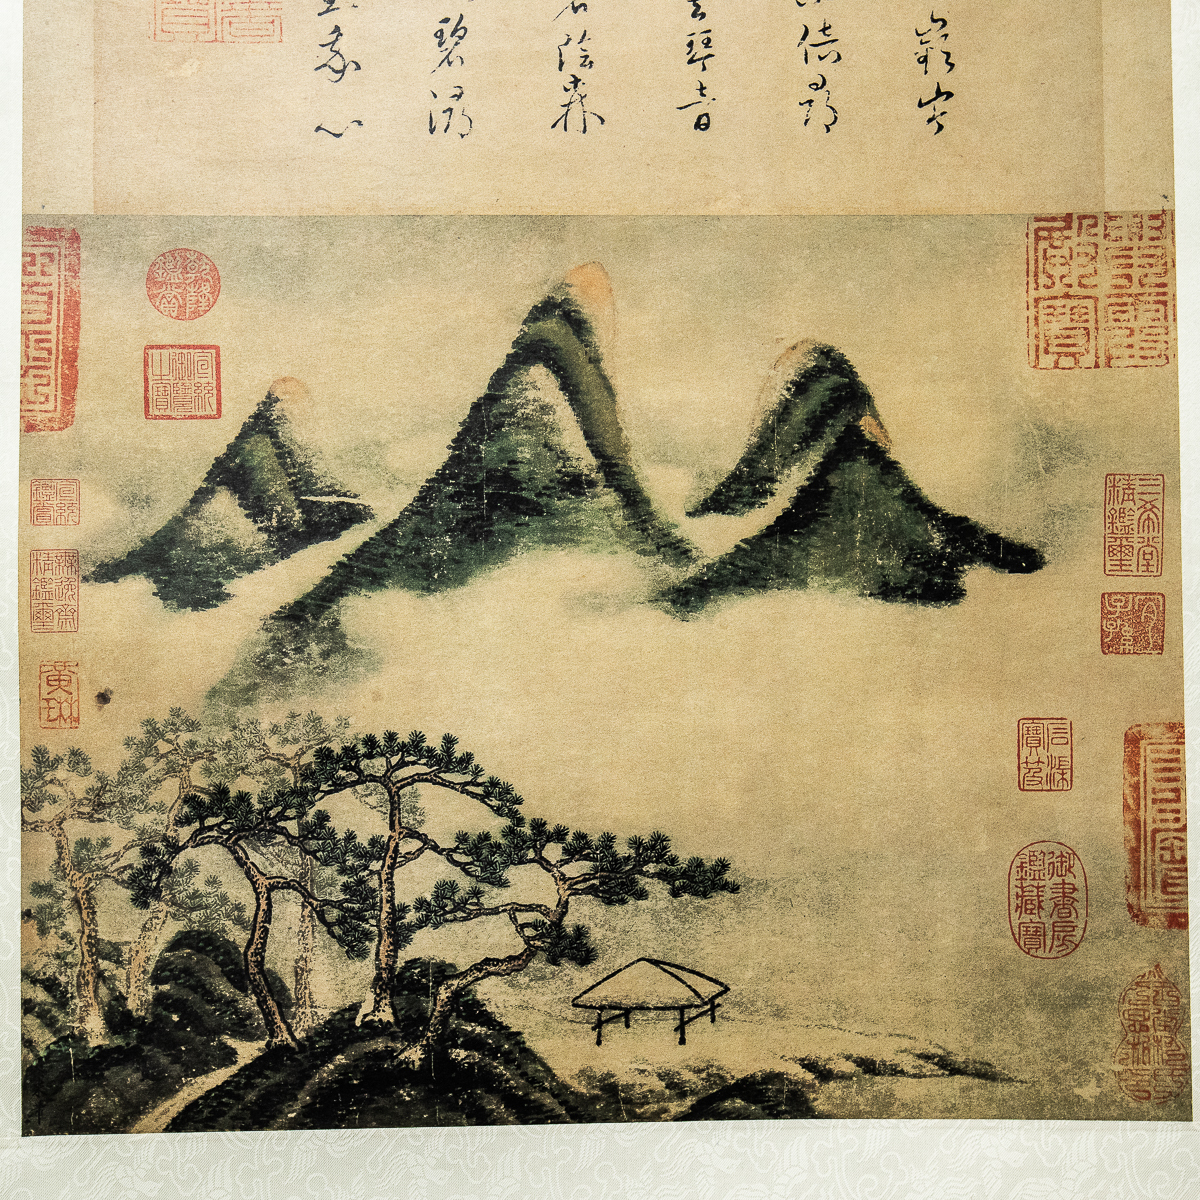 1720[ printing industrial arts ] Song rice ftsu spring mountain . pine map two . company China paper .